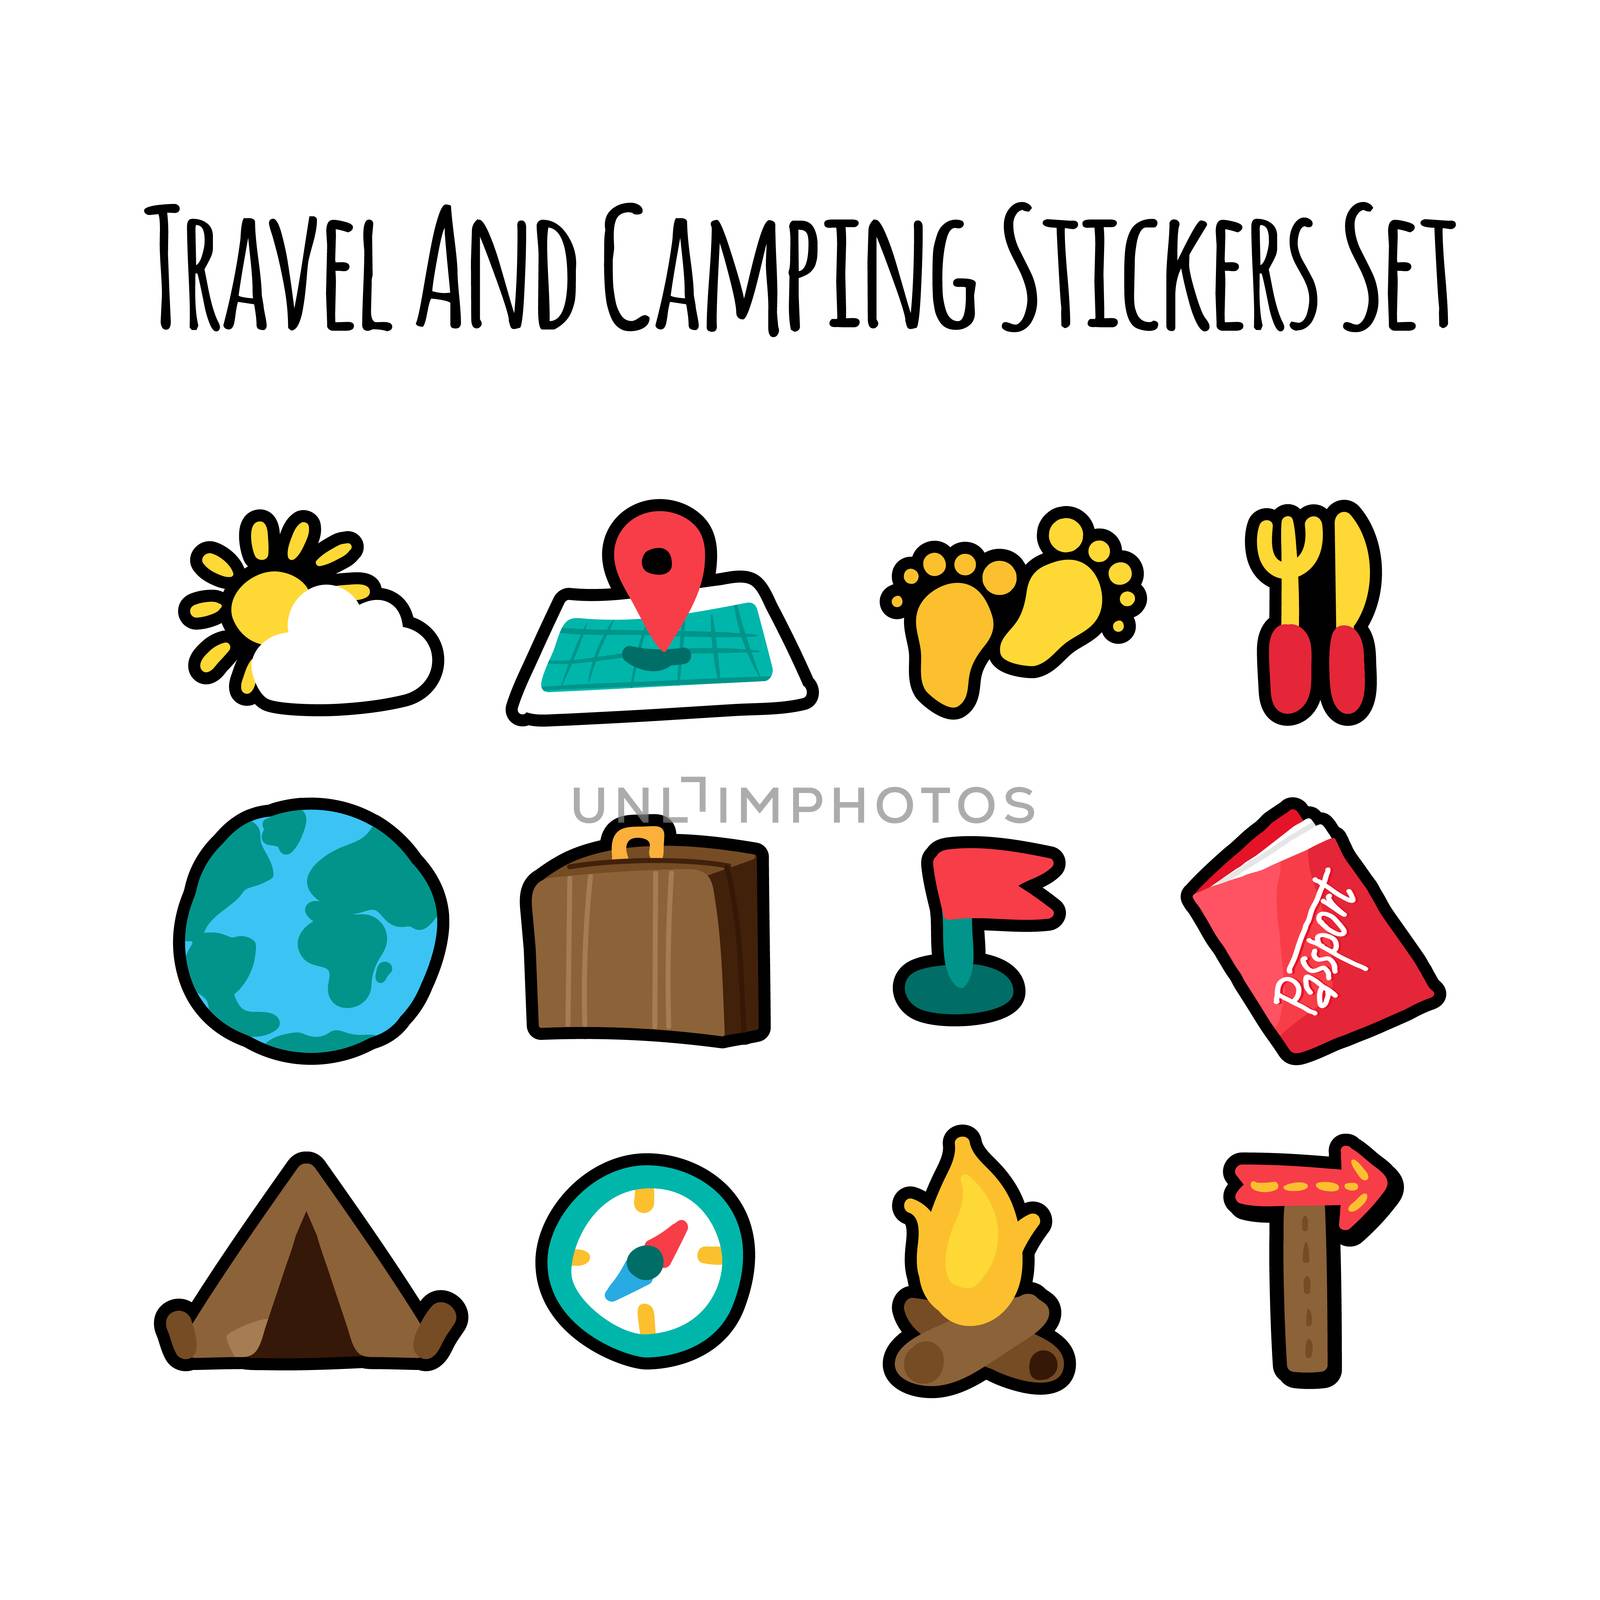 Camping and traveling stcikers set by barsrsind